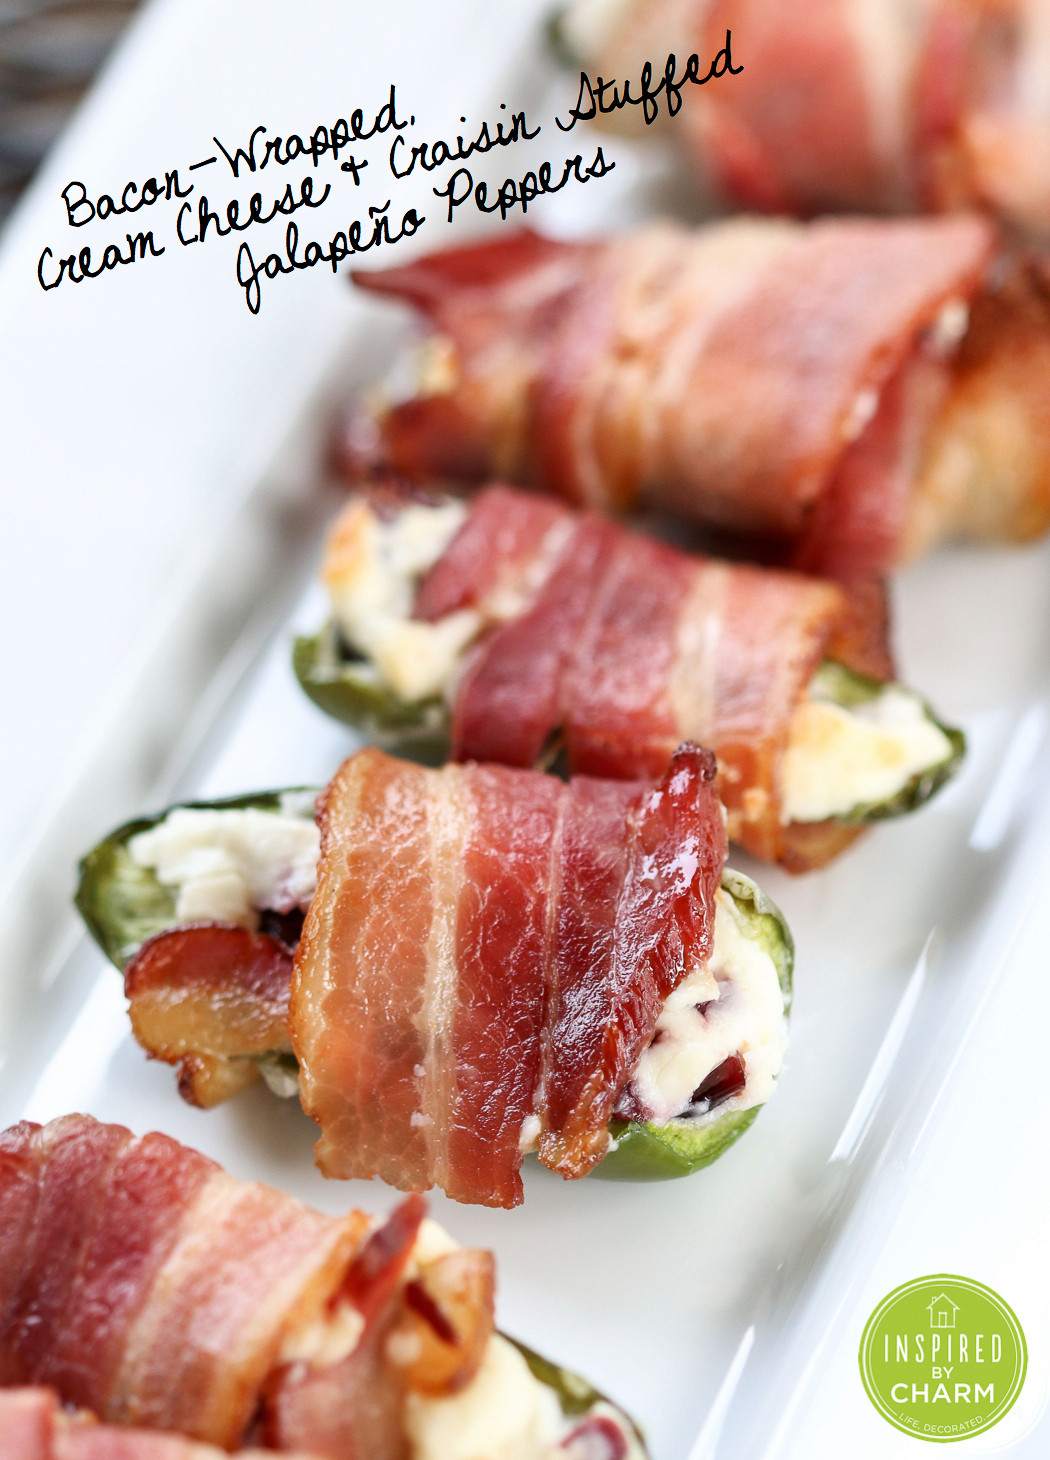 Bacon Wrapped Appetizers Cream Cheese
 Bacon Wrapped Cream Cheese Stuffed Jalapeño Peppers